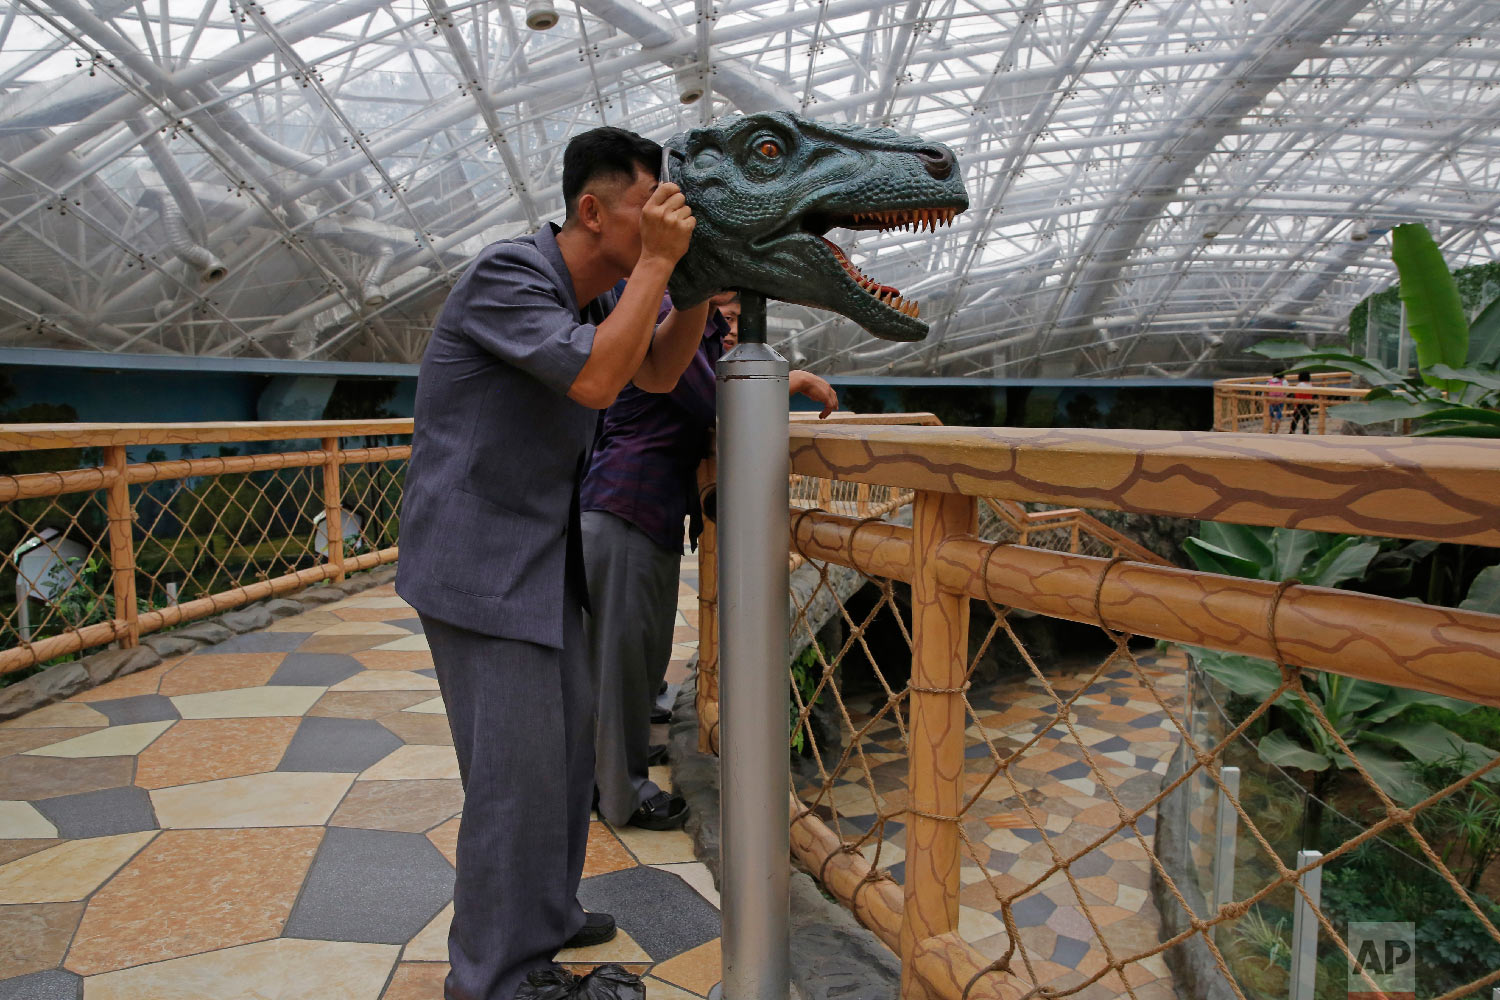  A North Korean man looks through a device to study the vision of a dinosaur, at the Central Zoo in Pyongyang, North Korea Saturday, Sept. 15, 2018. (AP Photo/Kin Cheung) 